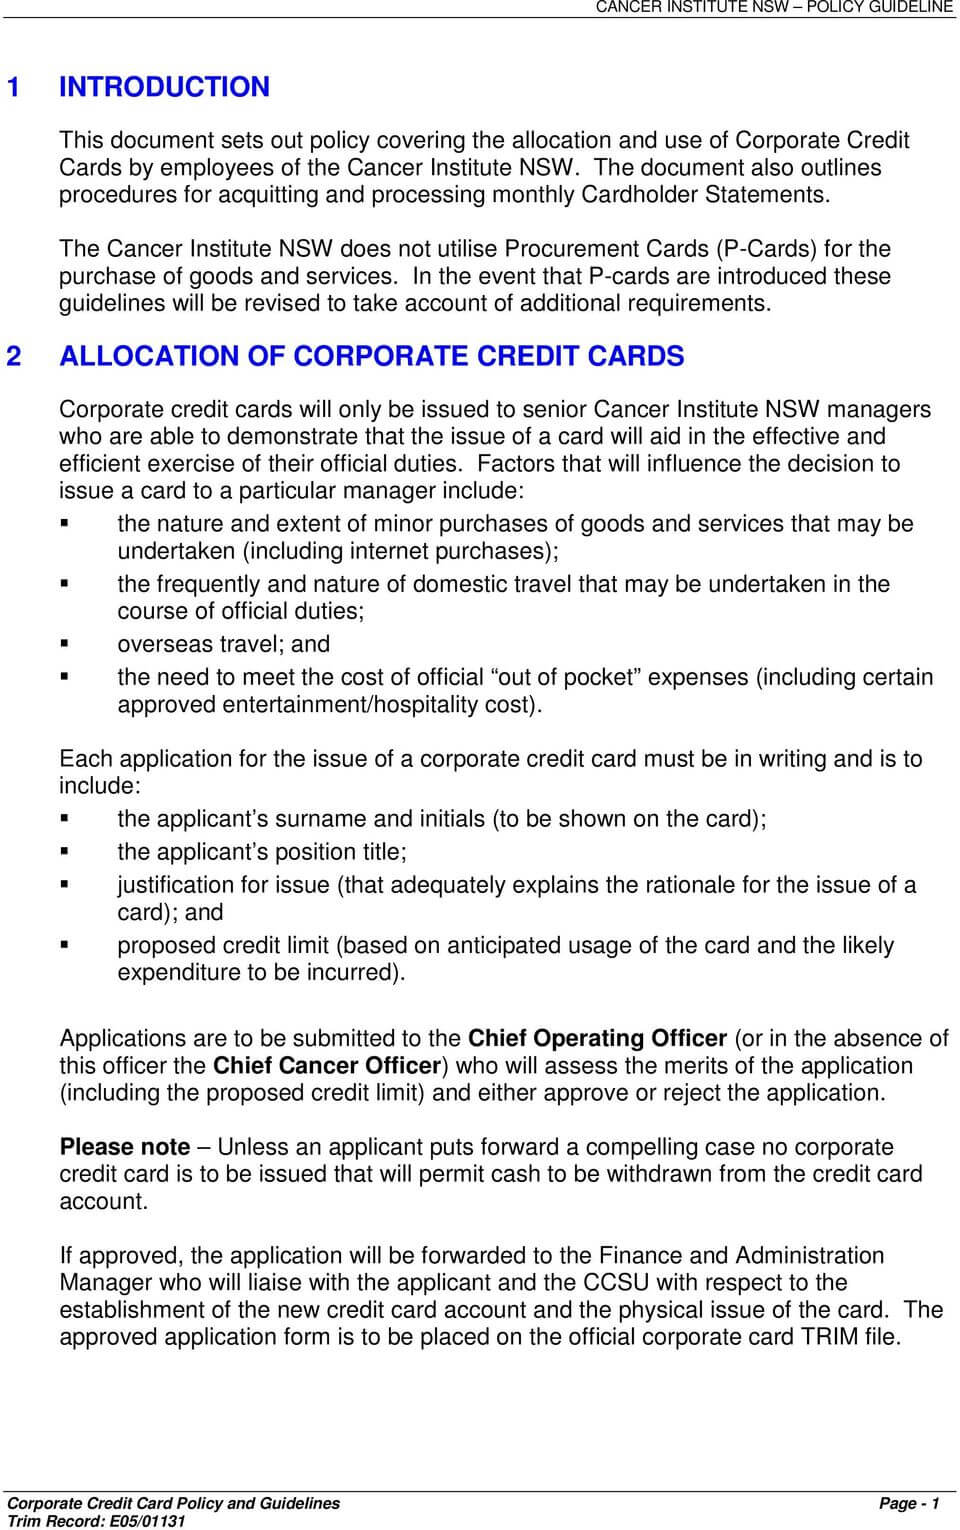 Corporate Credit Card Policy Template ] – Procurement Cards Inside Company Credit Card Policy Template